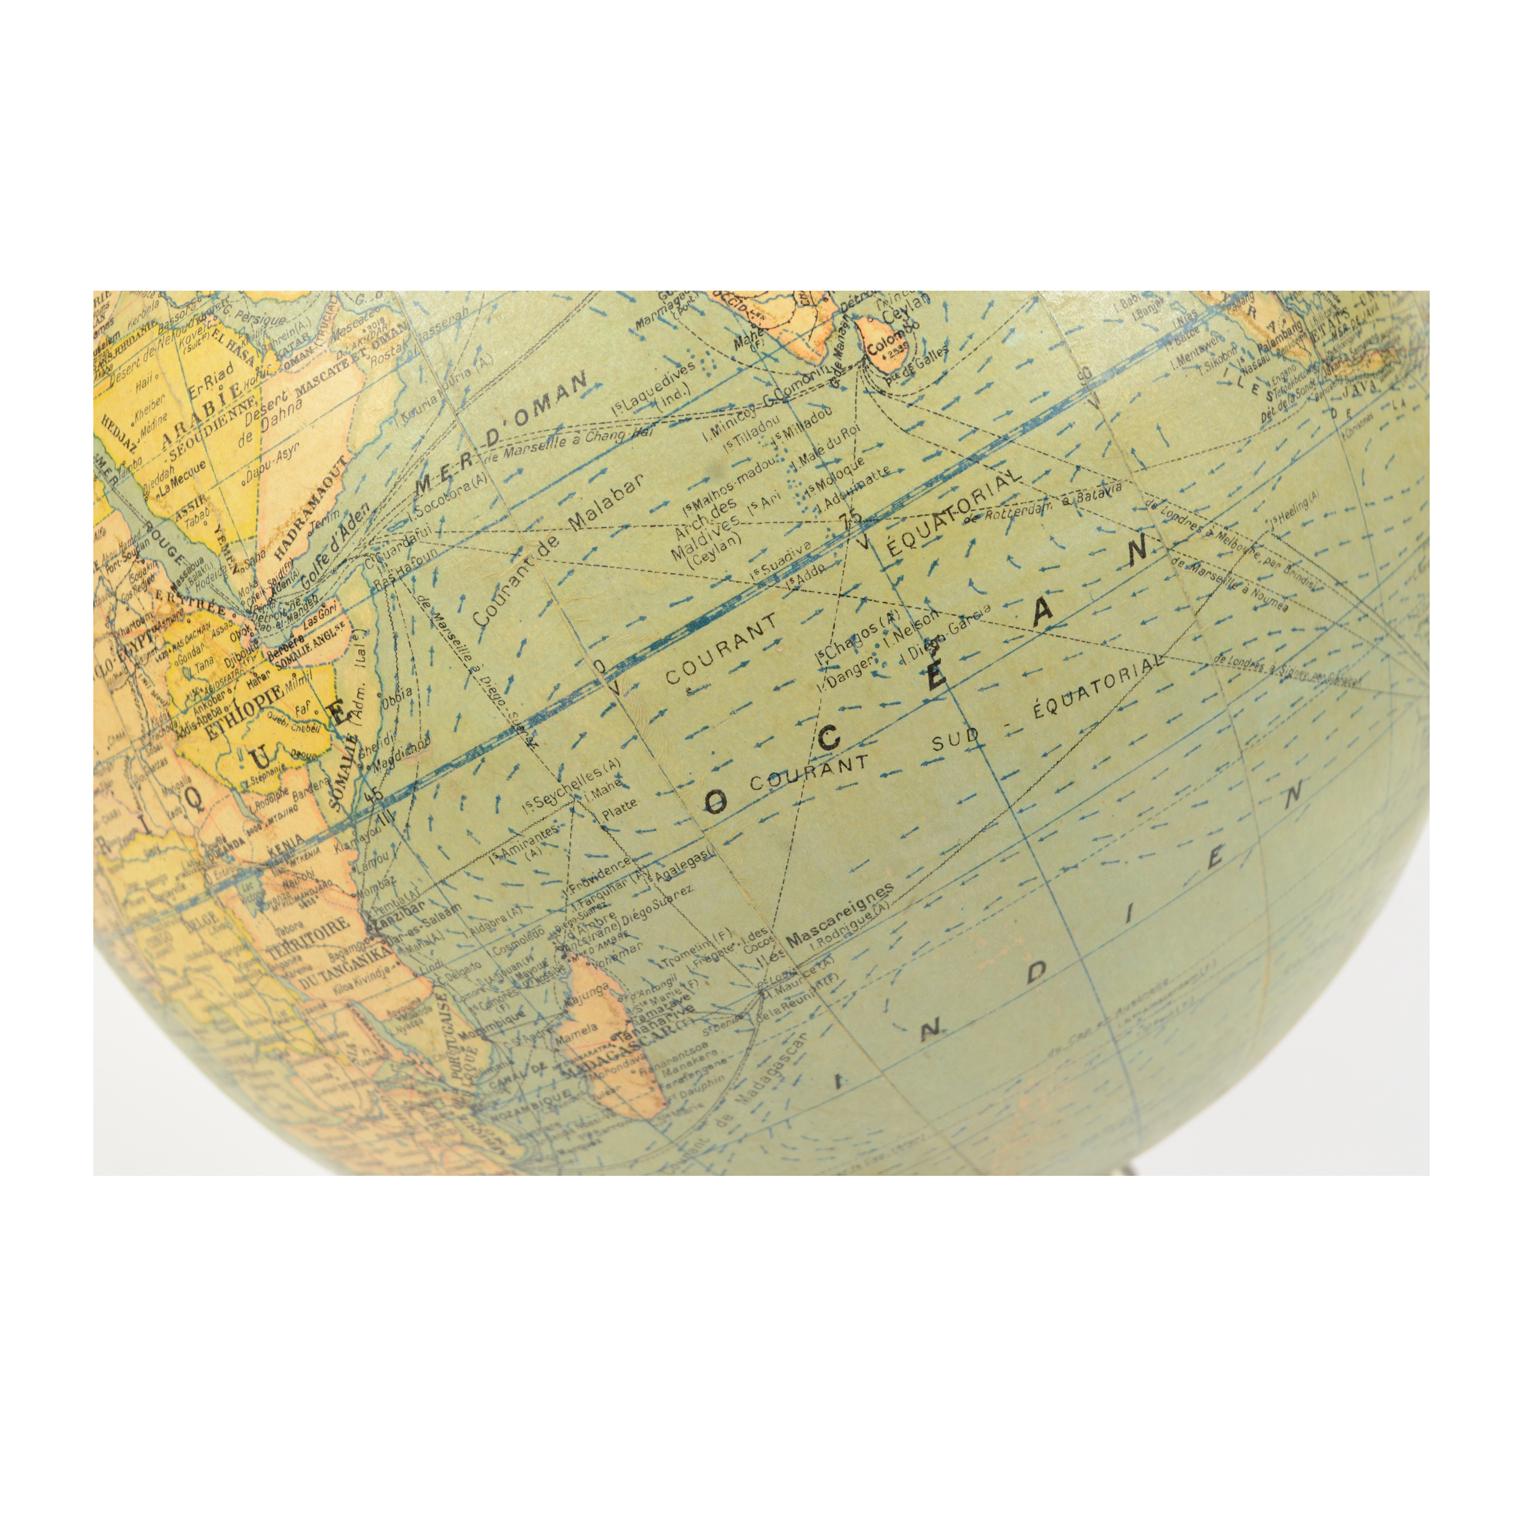 Wood Antique Terrestrial Globe Published in 1940s by Girard Barrère et Thomas, Paris For Sale